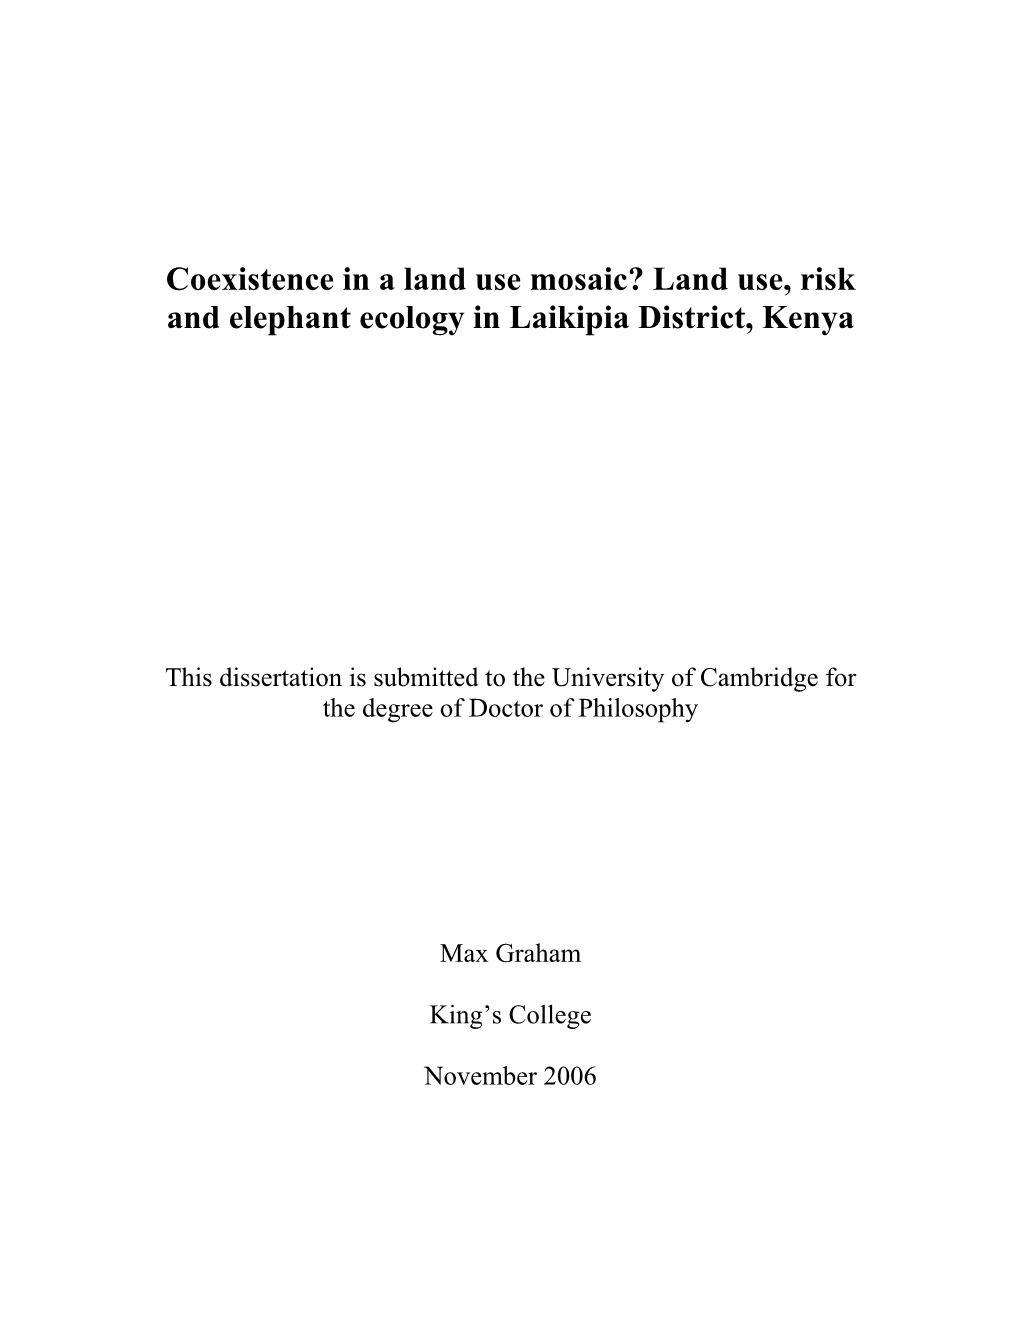 Land Use, Risk and Elephant Ecology in Laikipia District, Kenya